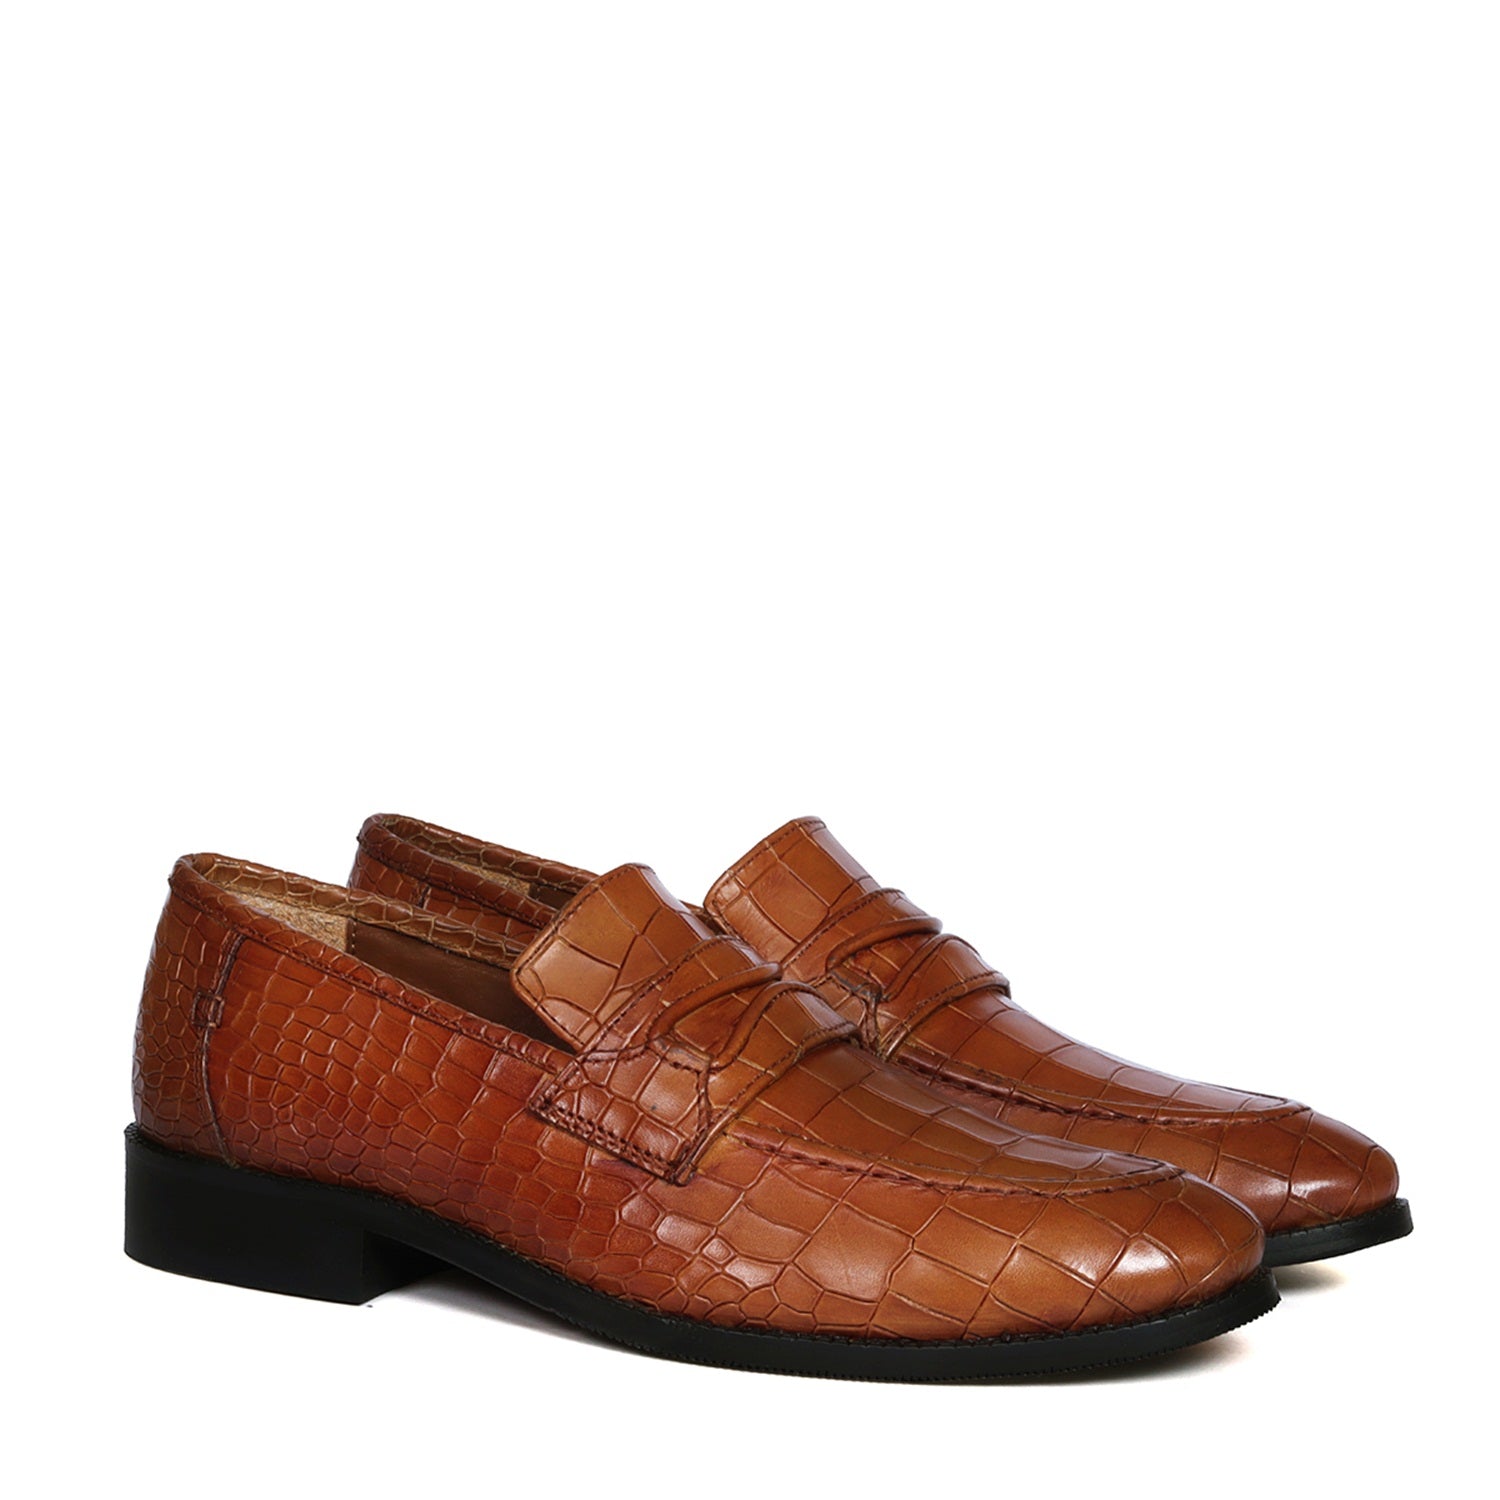 Mod Look Tan Deep Cut Leather Loafer With Rubber Sole